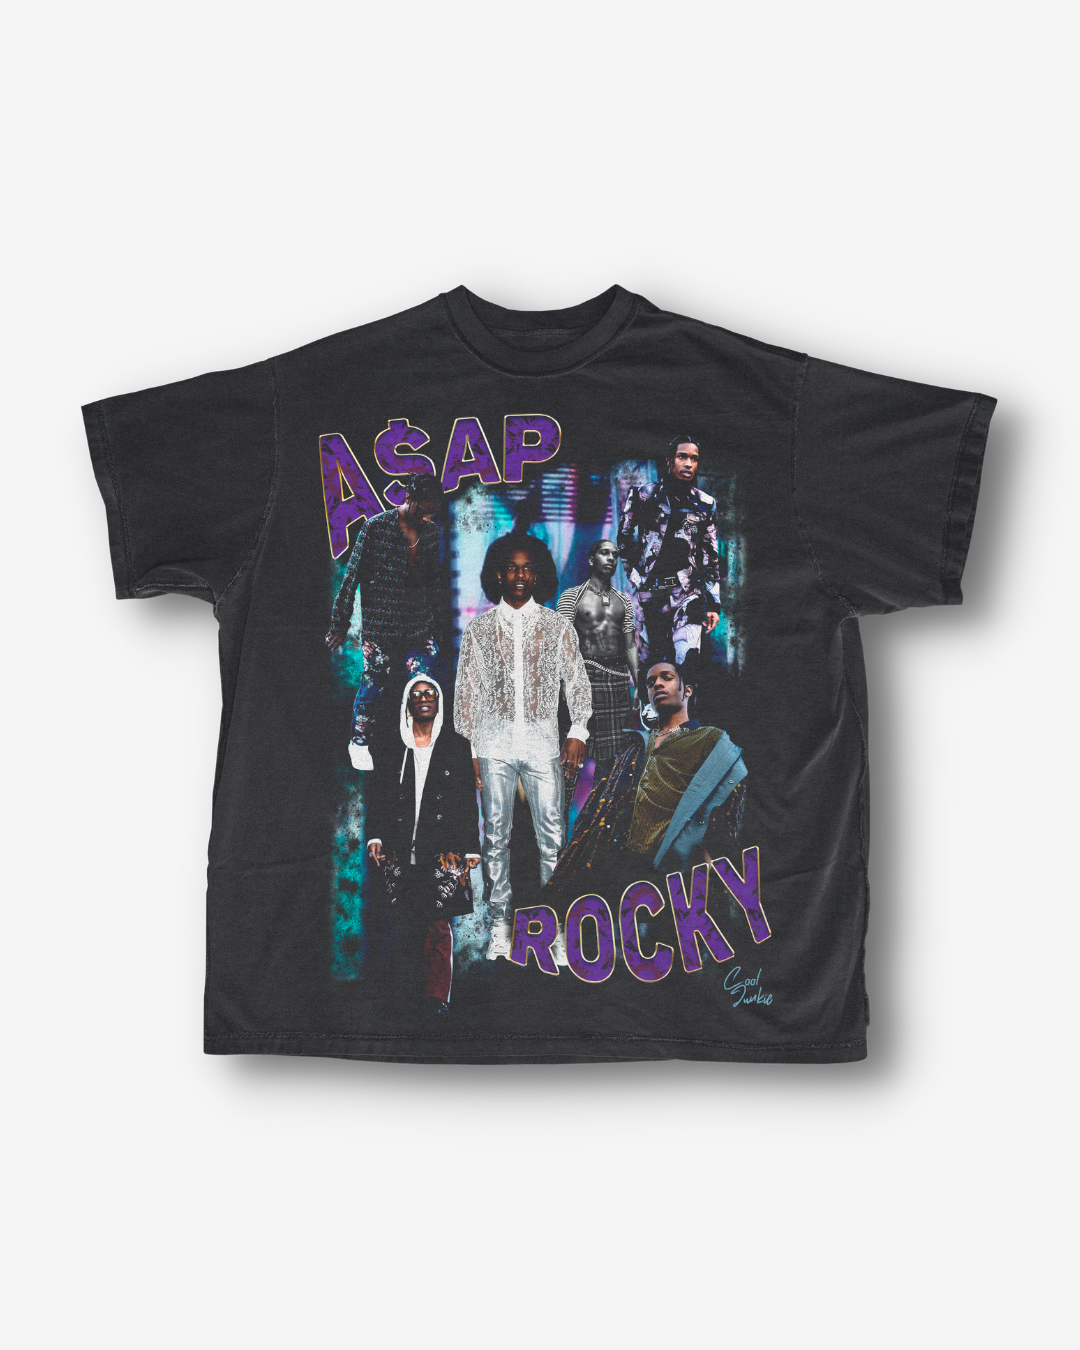 Grey A$AP Rocky Tee with purple and blue as the main colors in the design